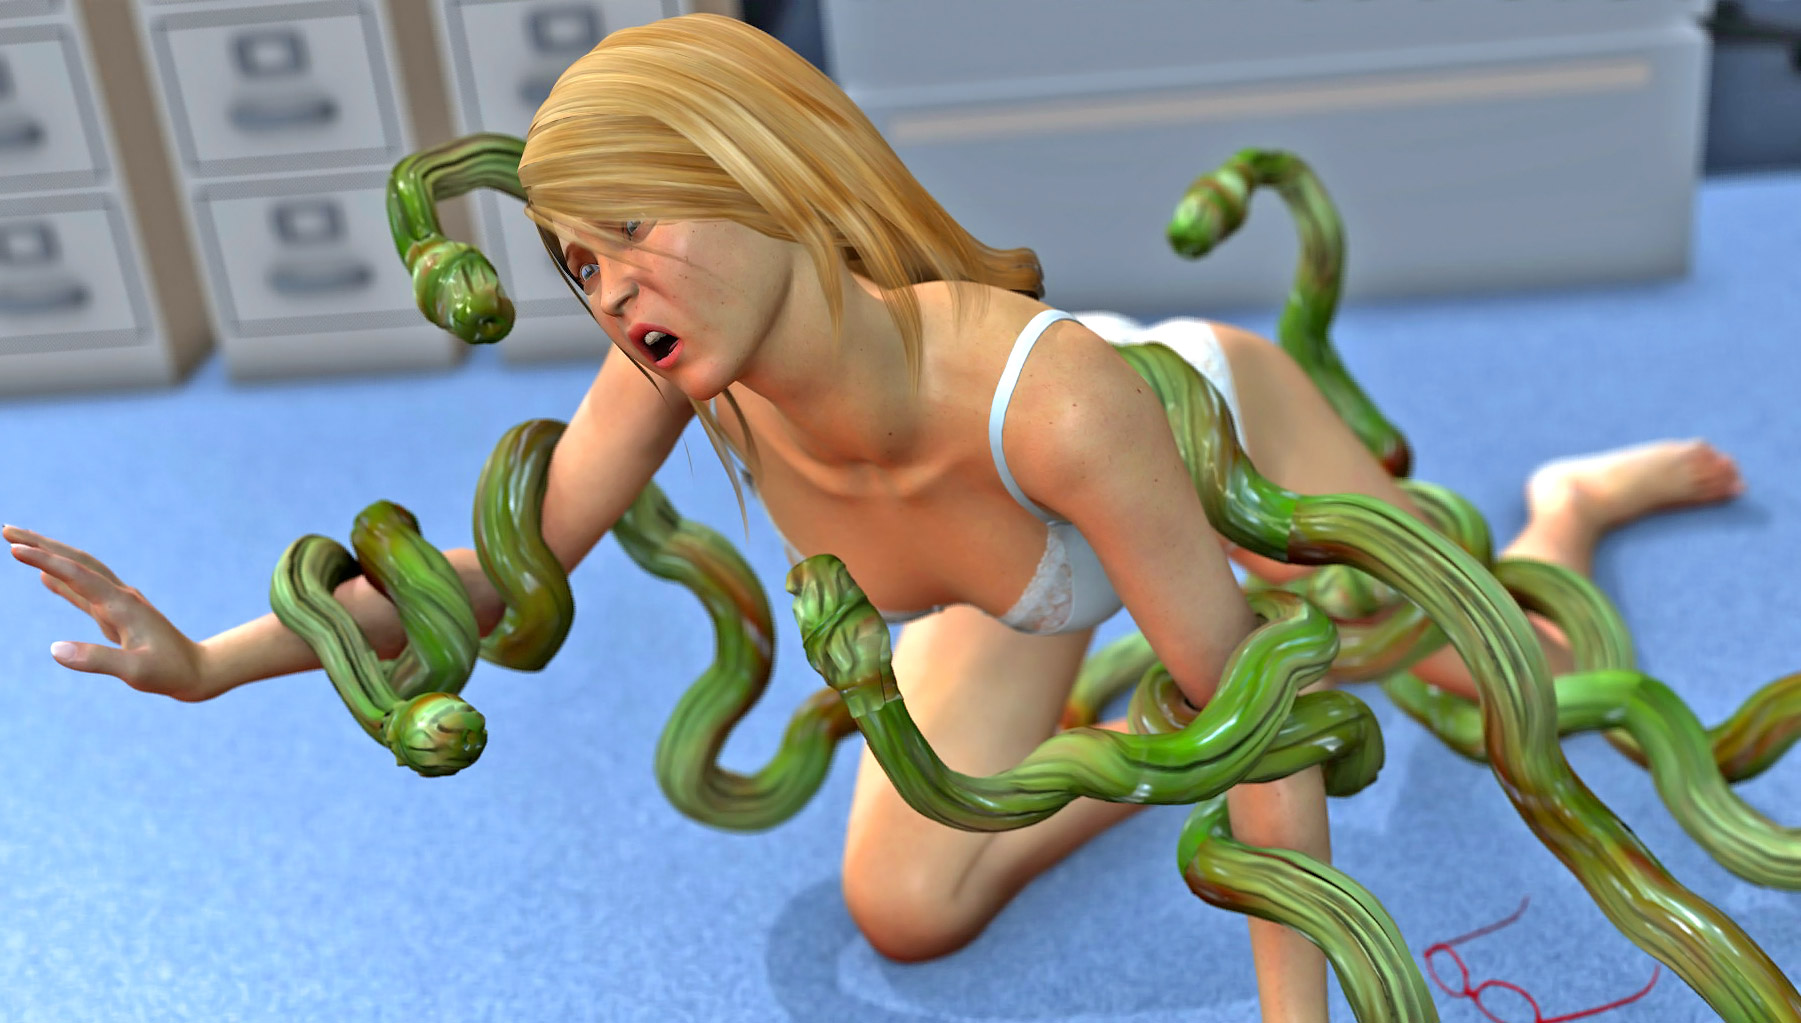 Kinky 3d tentacle porn with a hot babe at 3dEvilMonsters